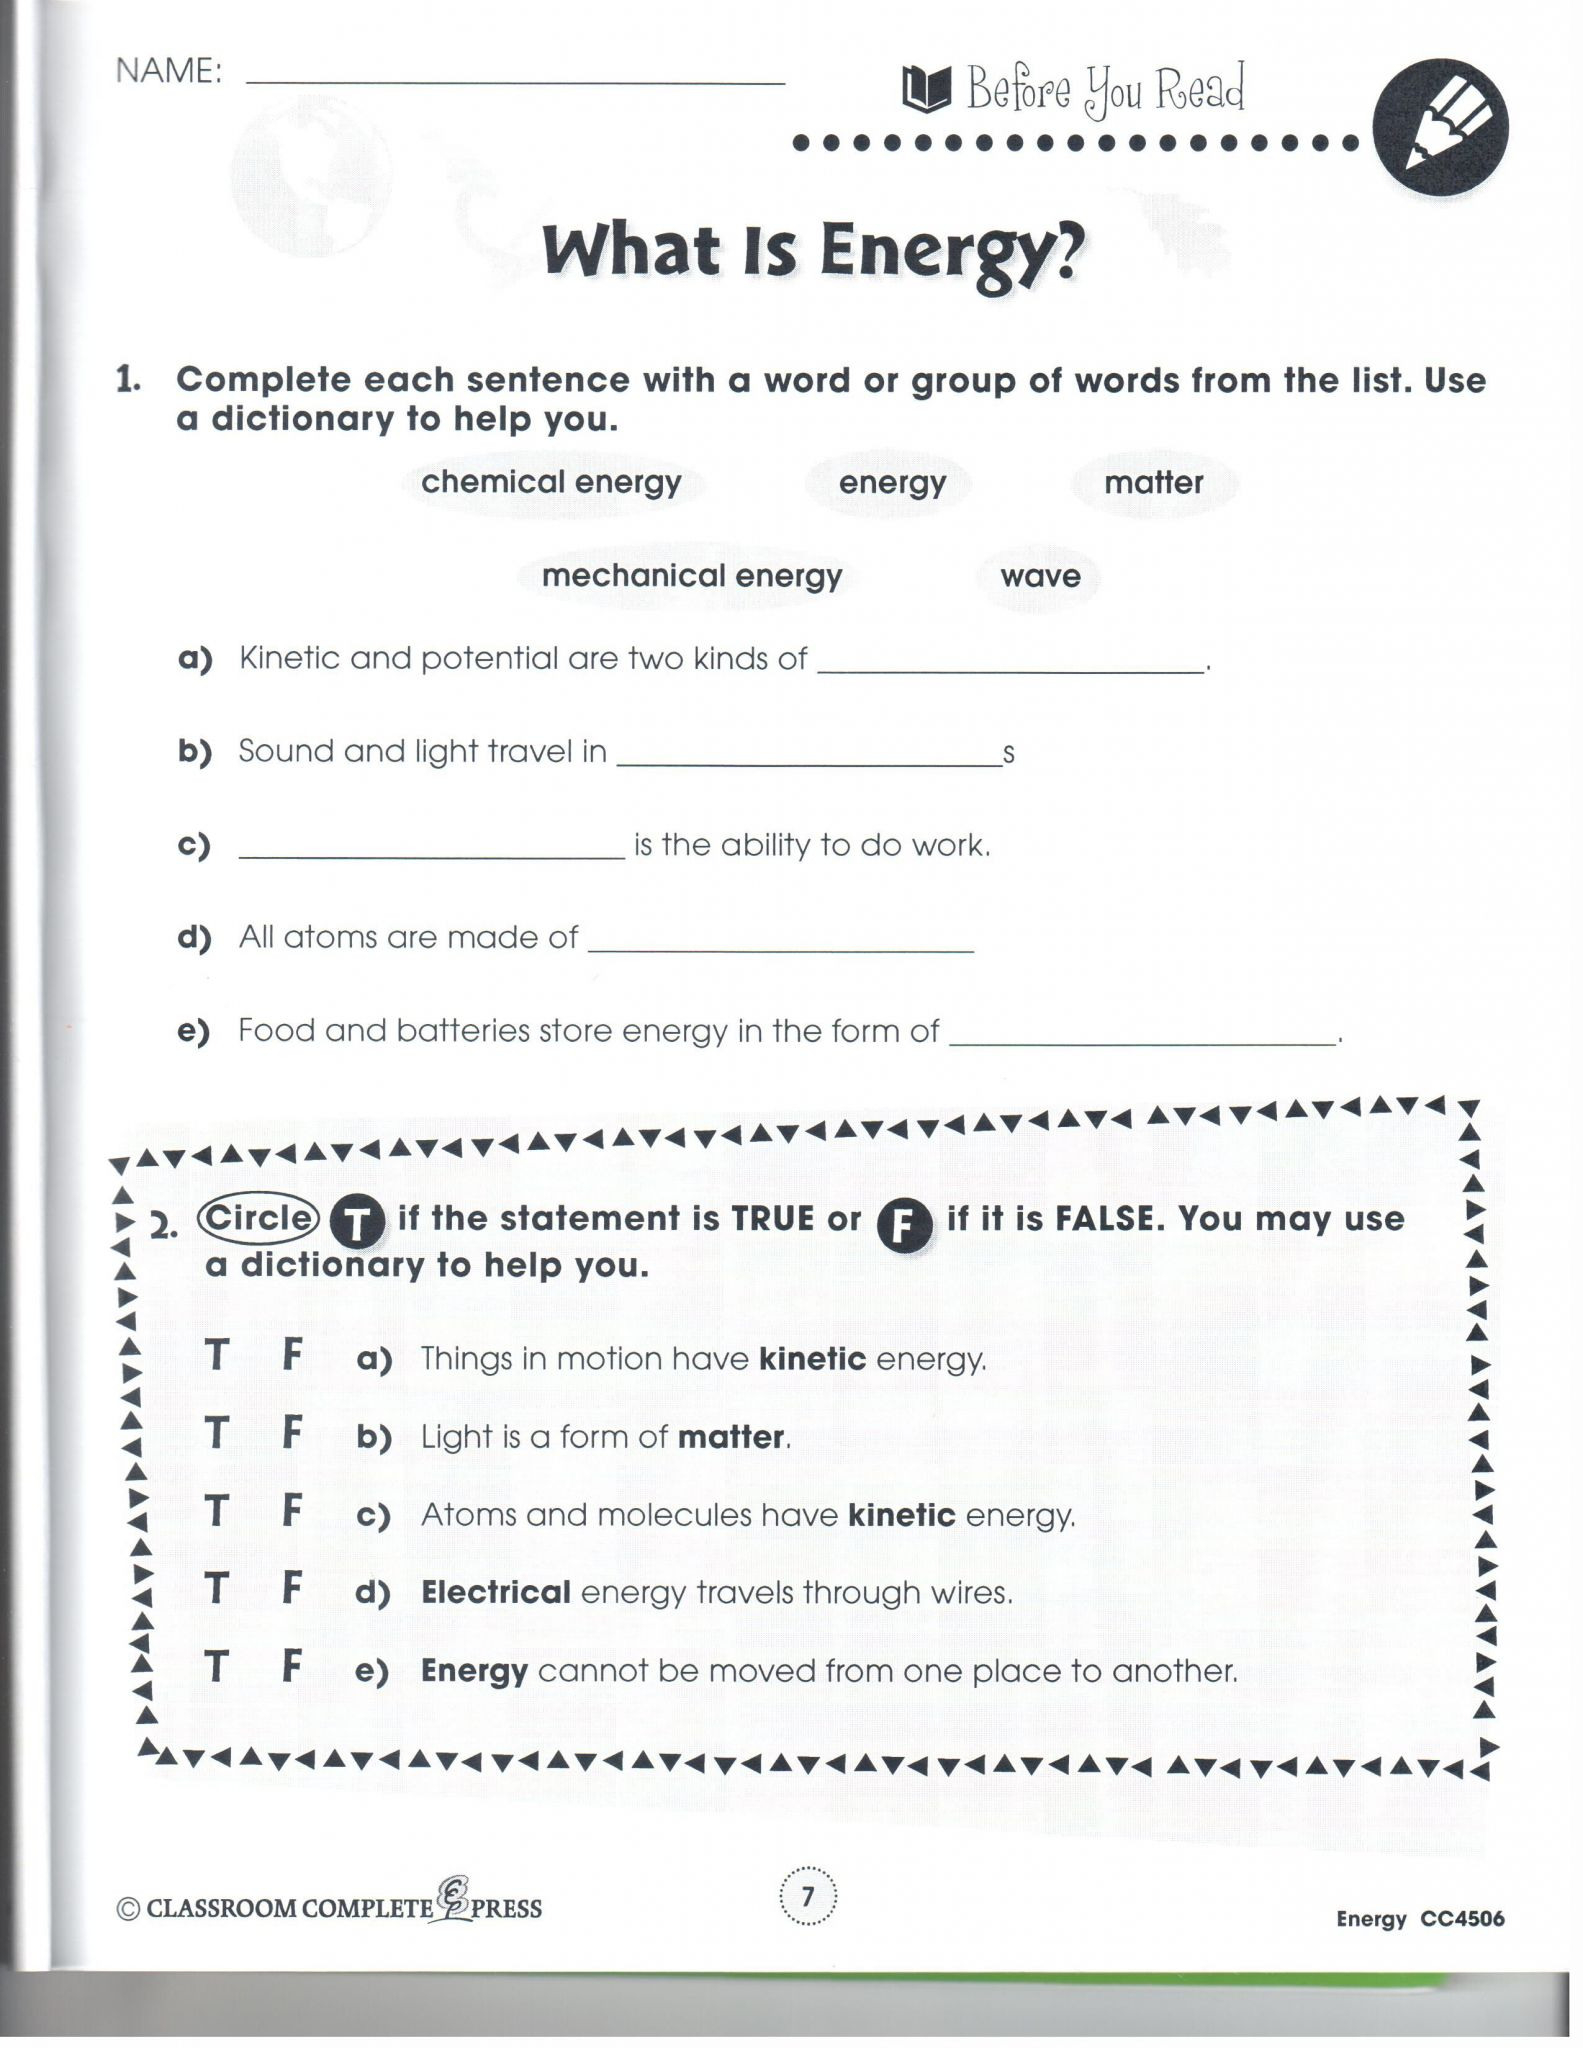 friction-and-gravity-lesson-quiz-worksheet-db-excel